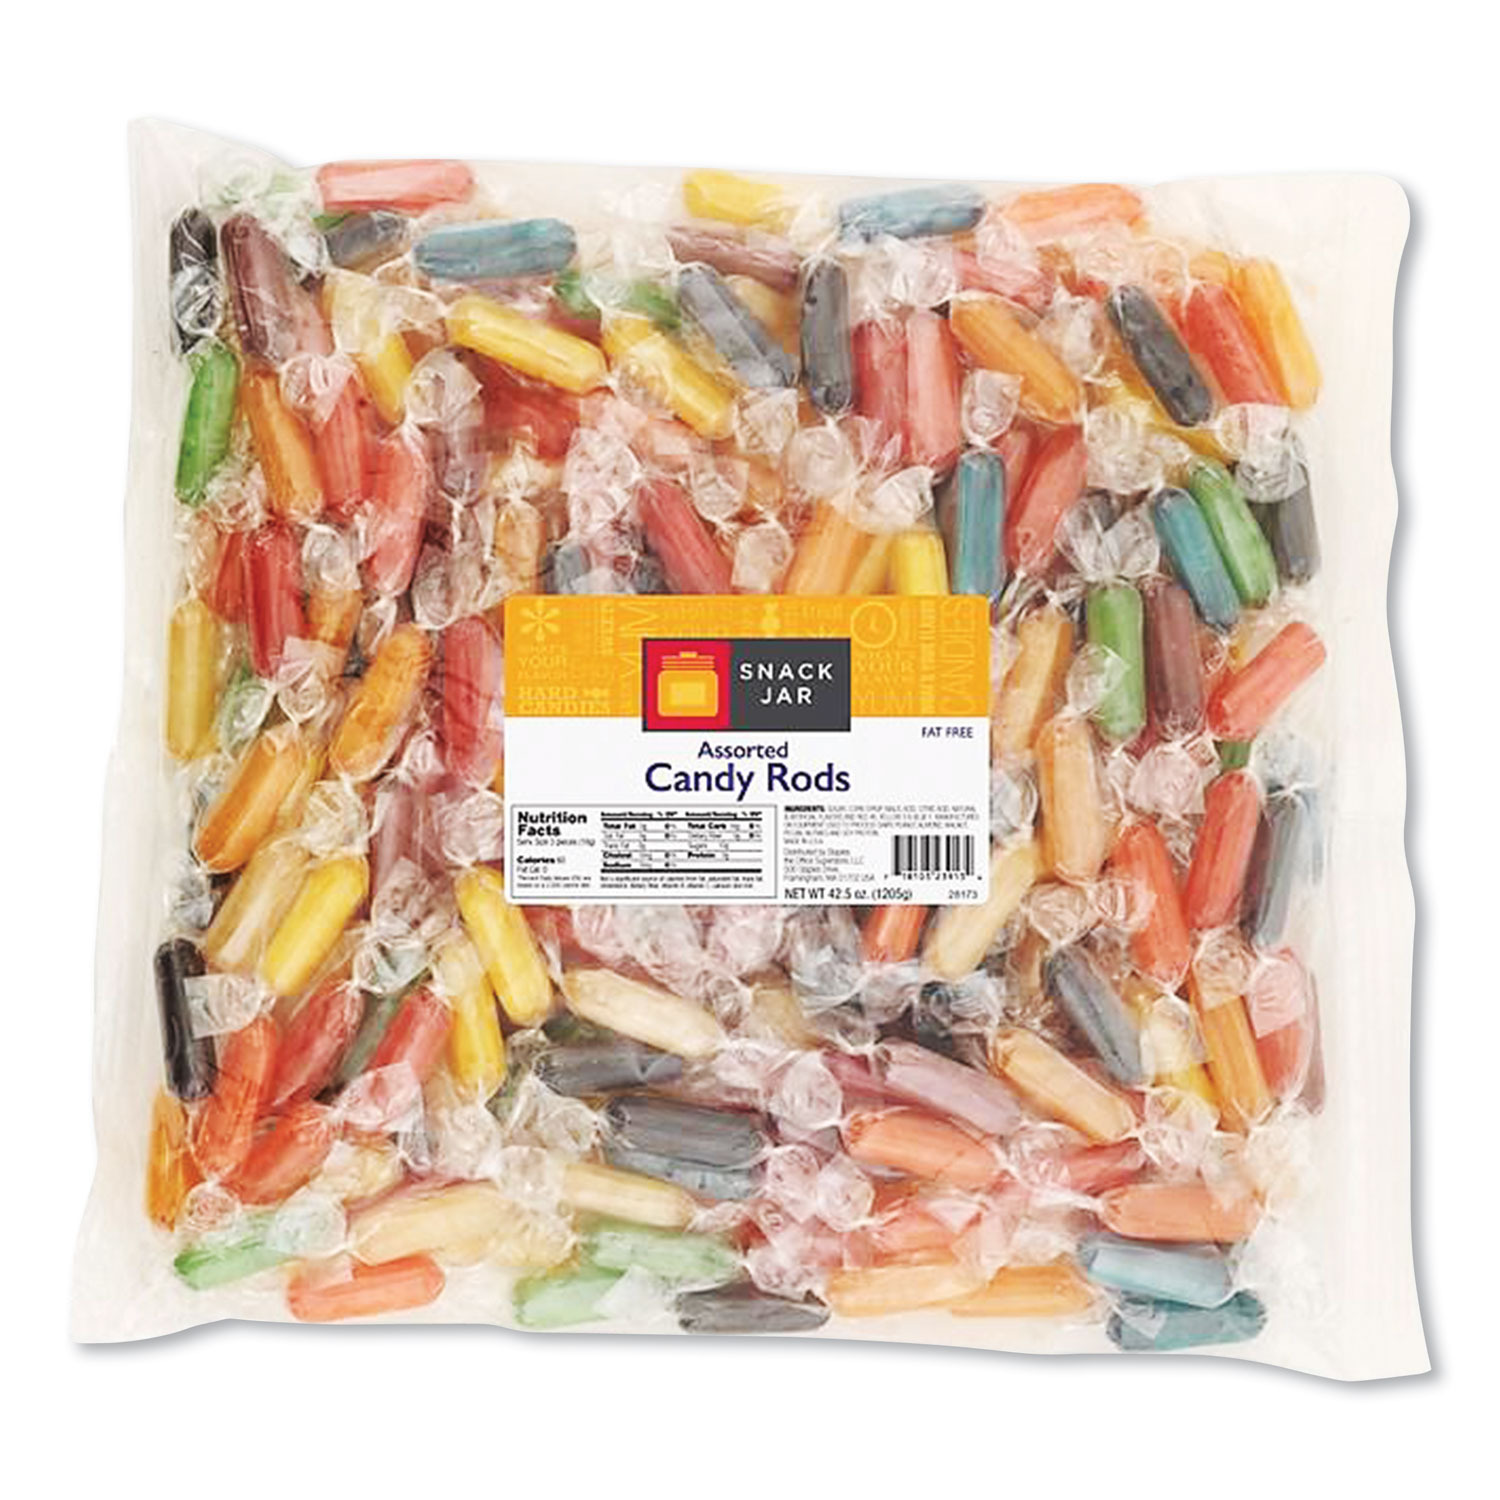  Snack Jar YPR23913 Mini Hard Candy Rods, Assorted, 2.7 lb Bag, Approximately 65 Pieces (SJR1680286) 